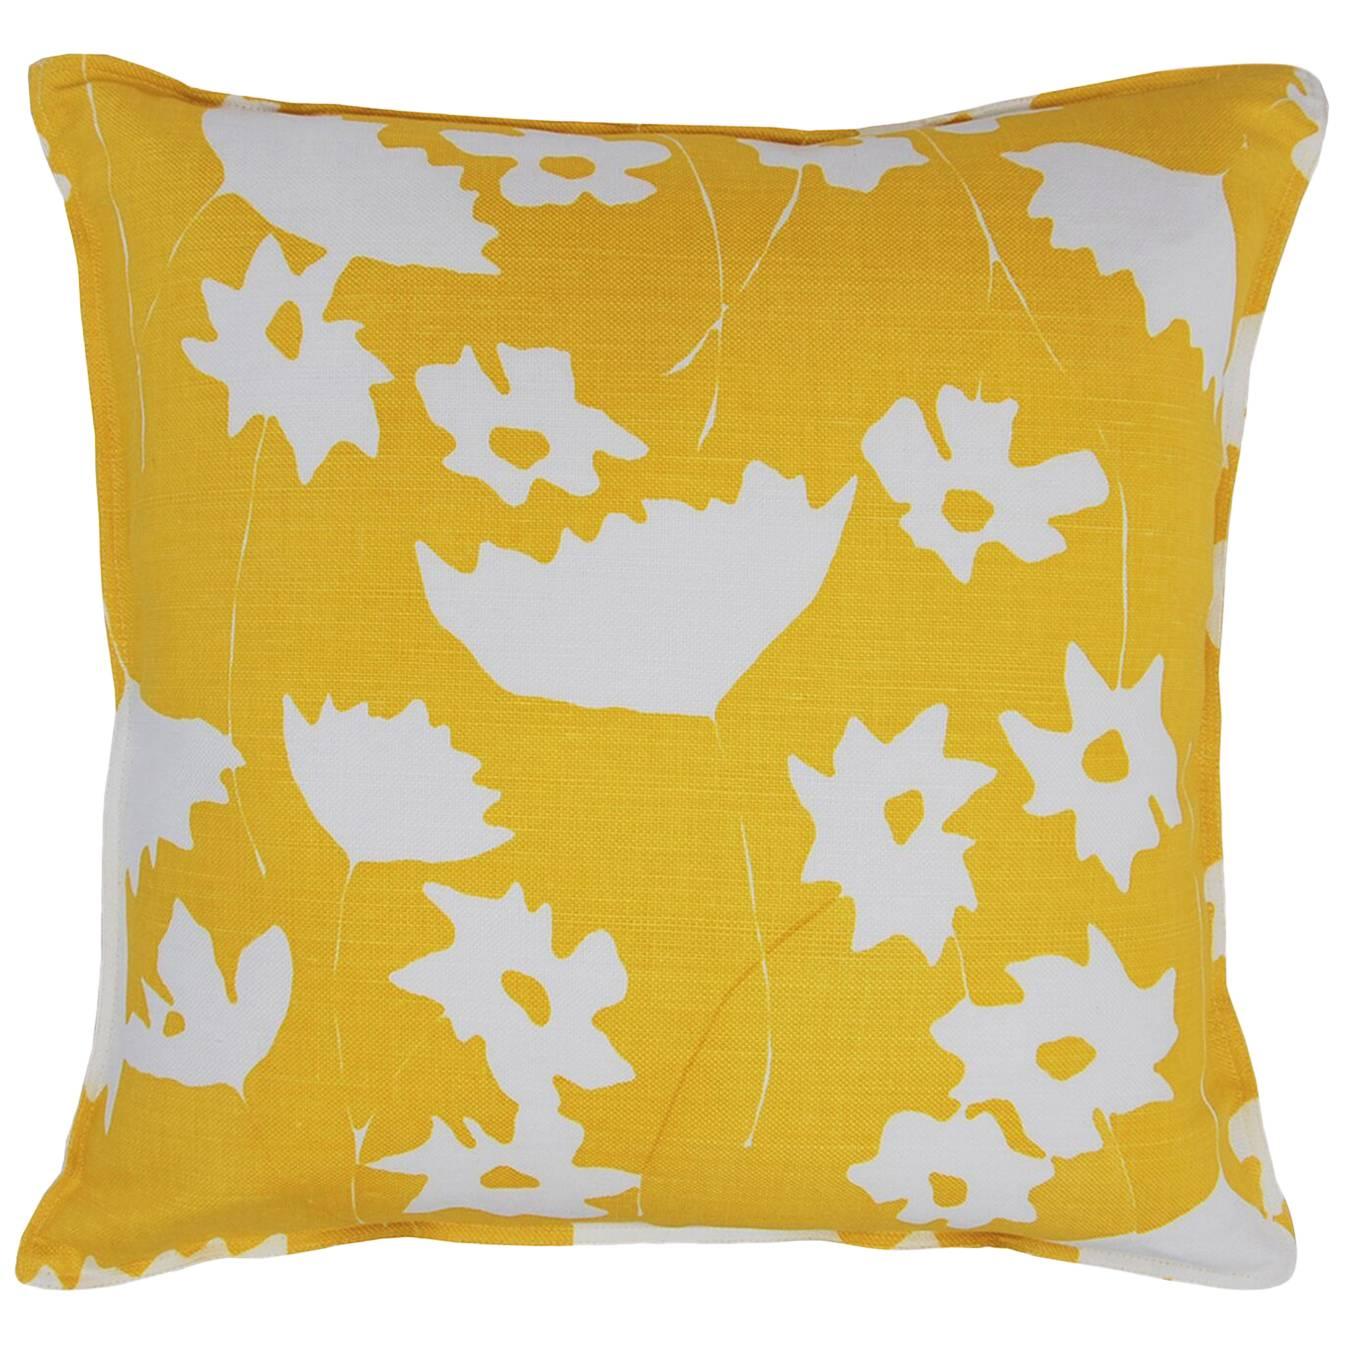 Sunshine Cosmos on Oyster Cotton Linen Pillow For Sale